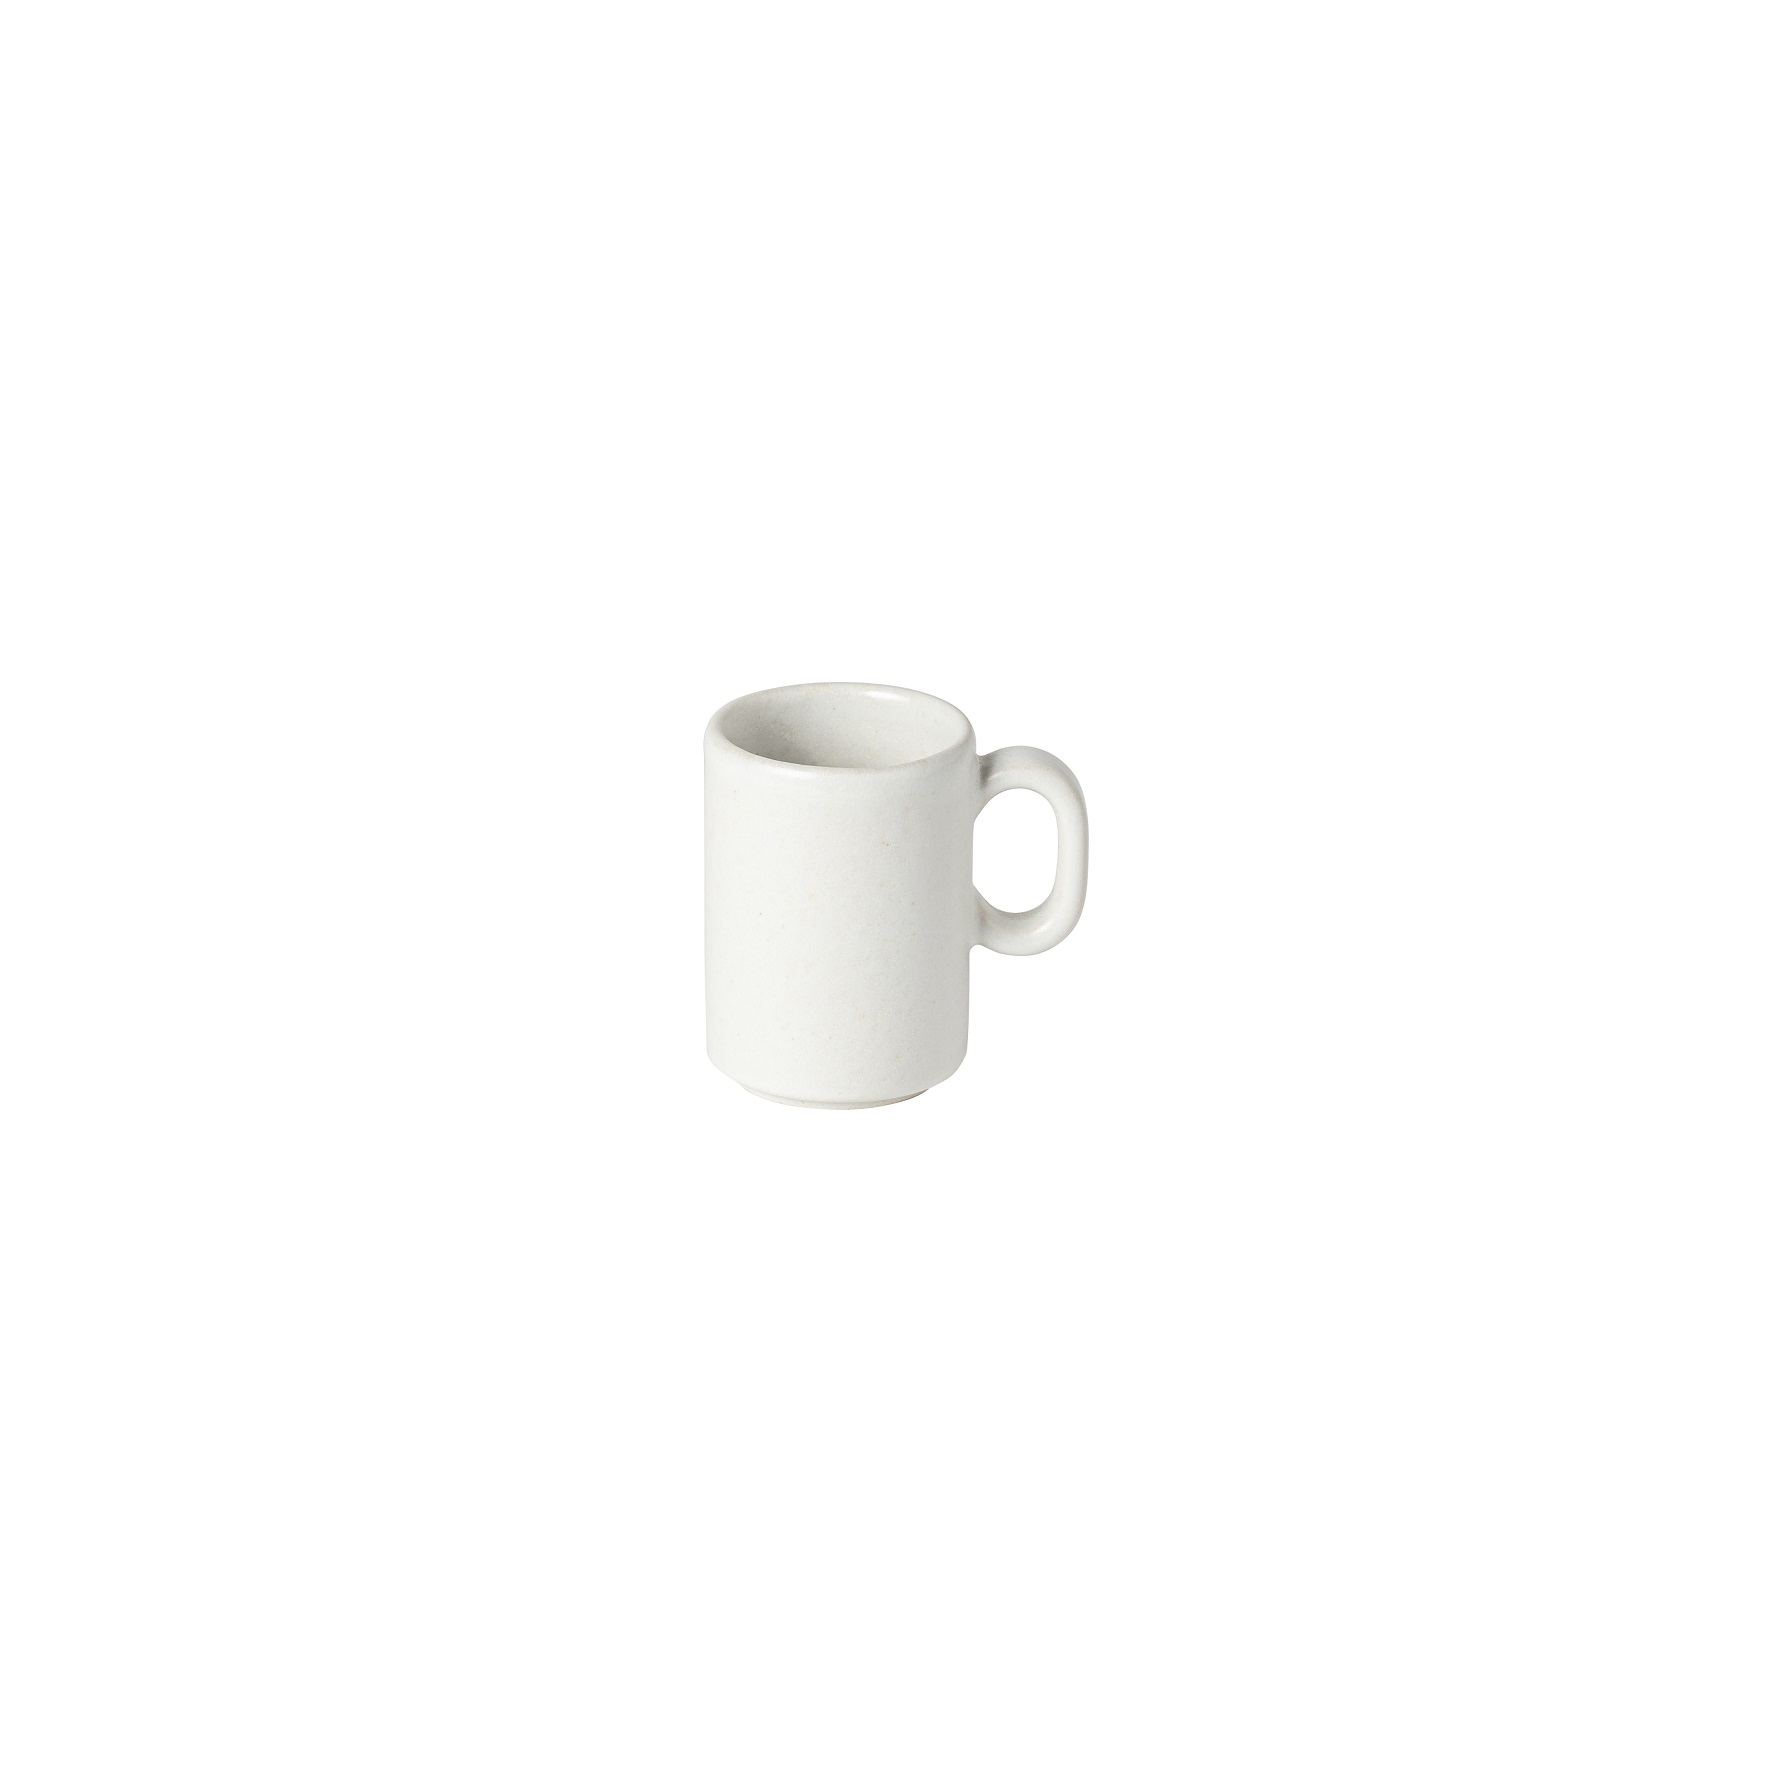 Redonda White Coffee Cup  7cl Gift